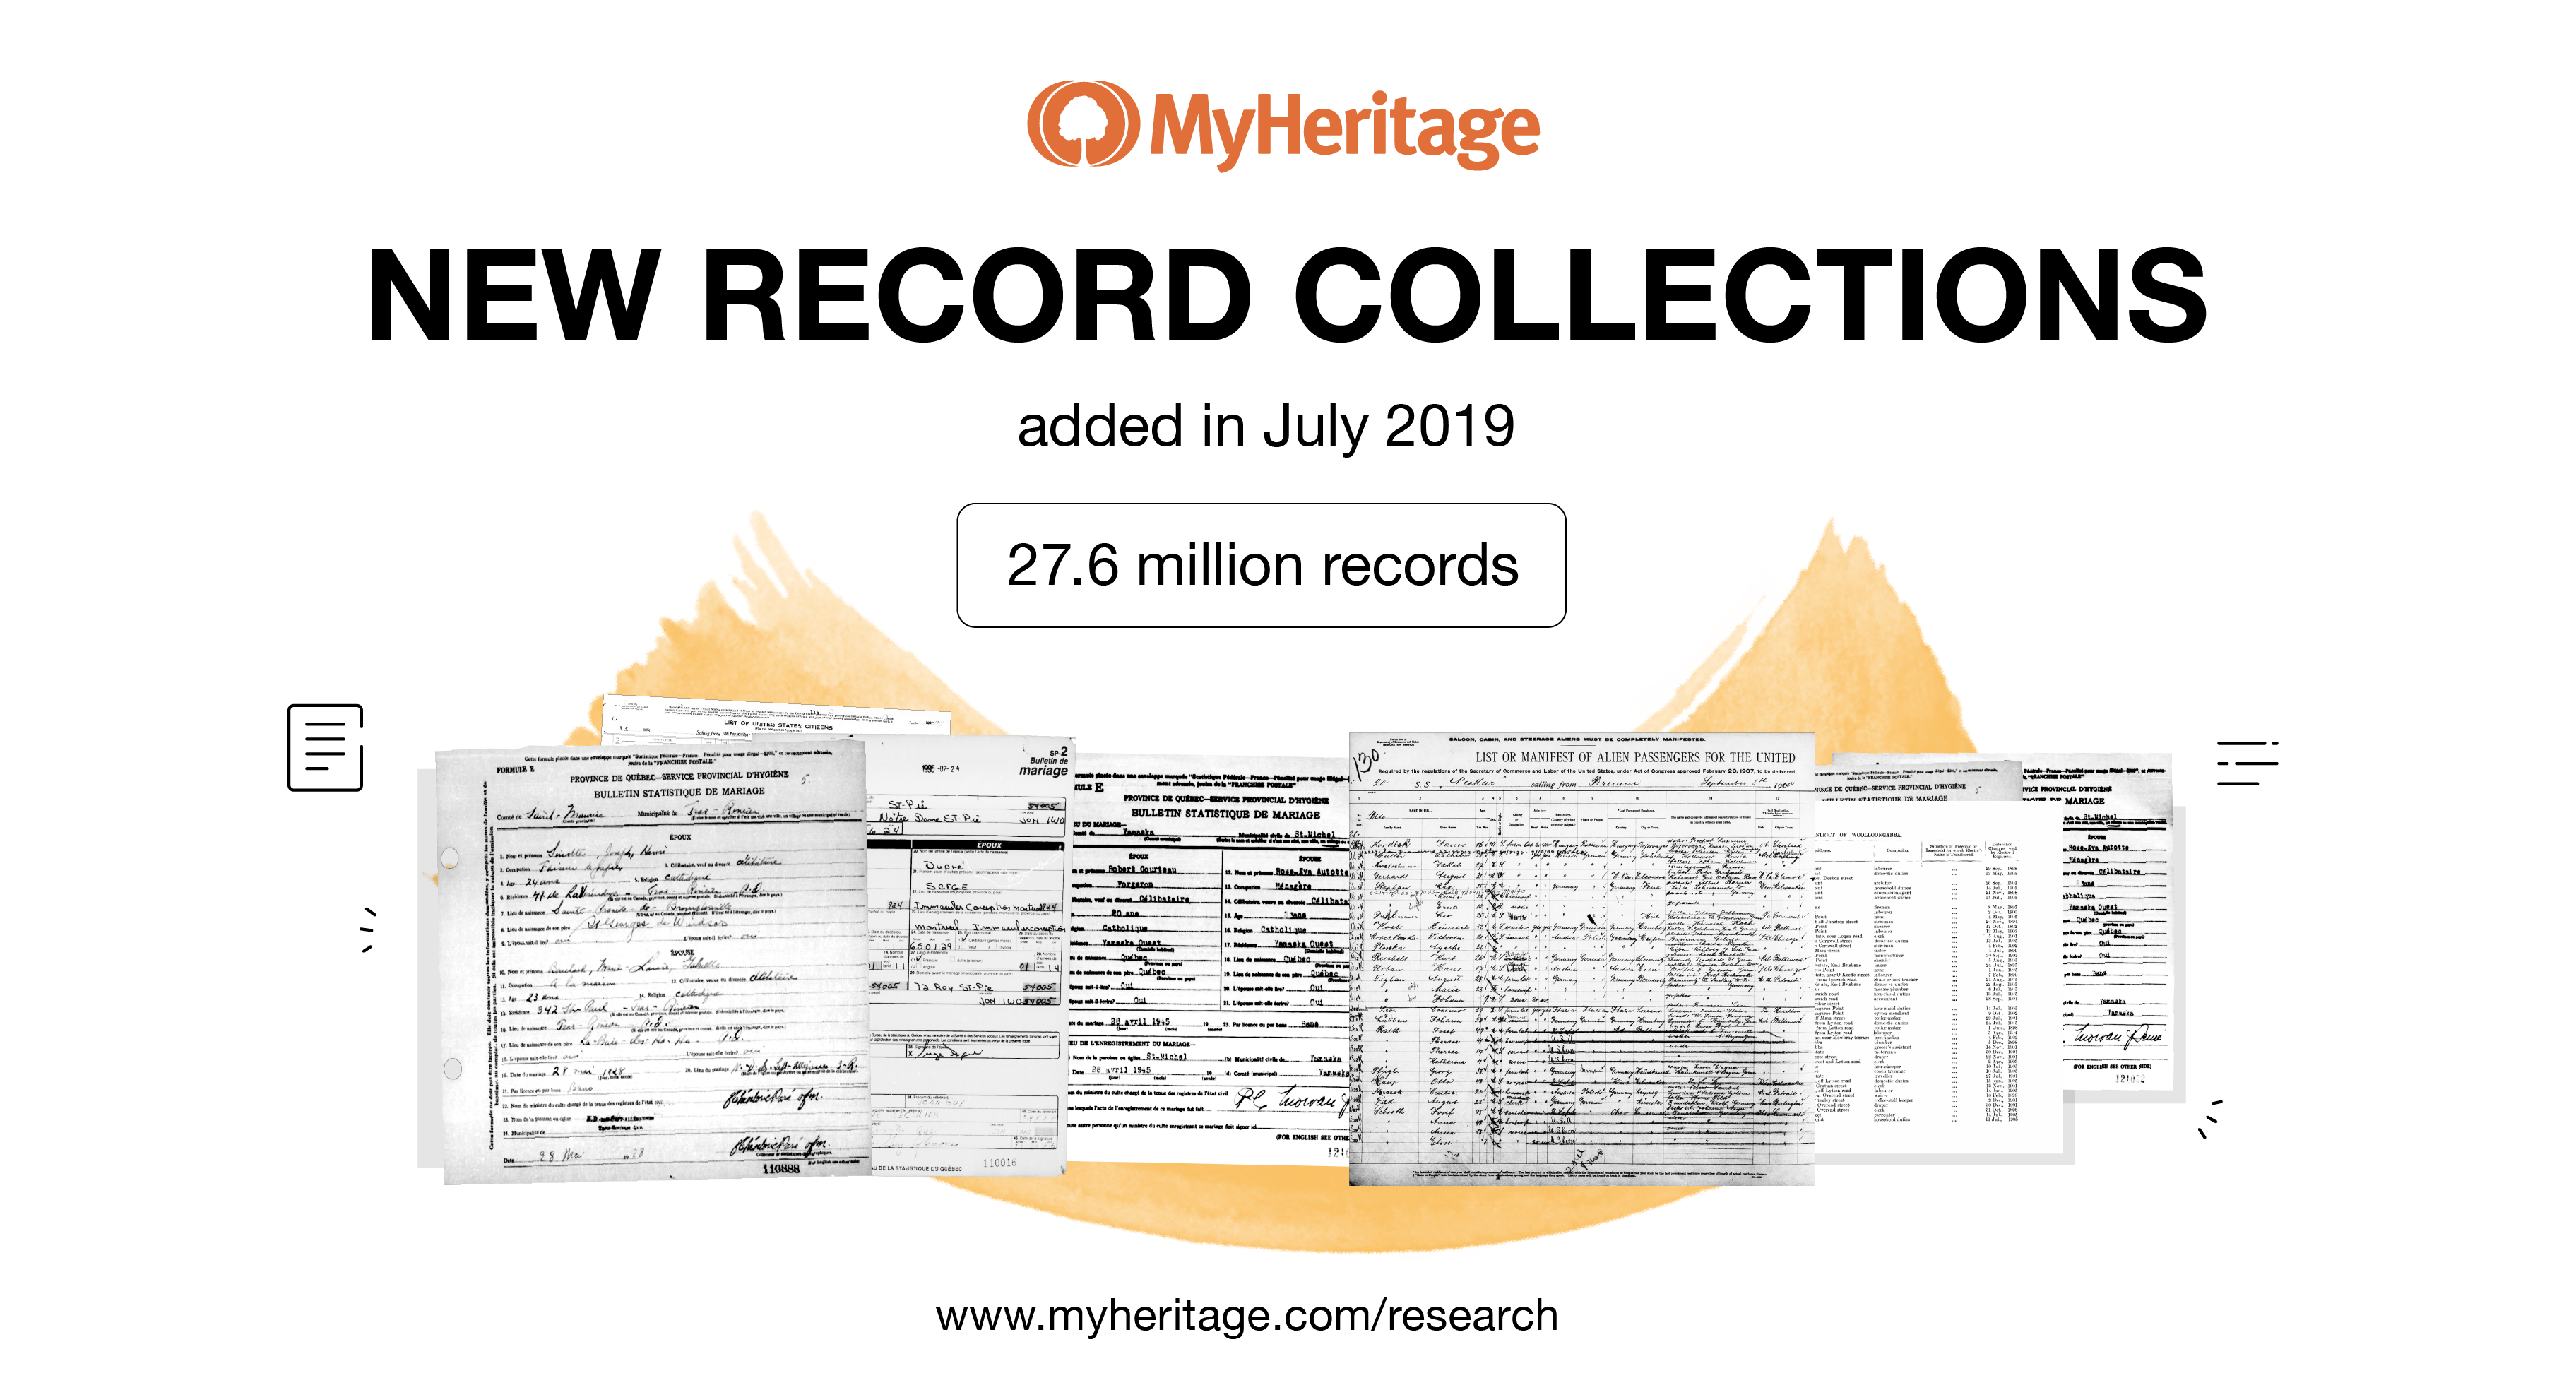 New record collections added in July 2019